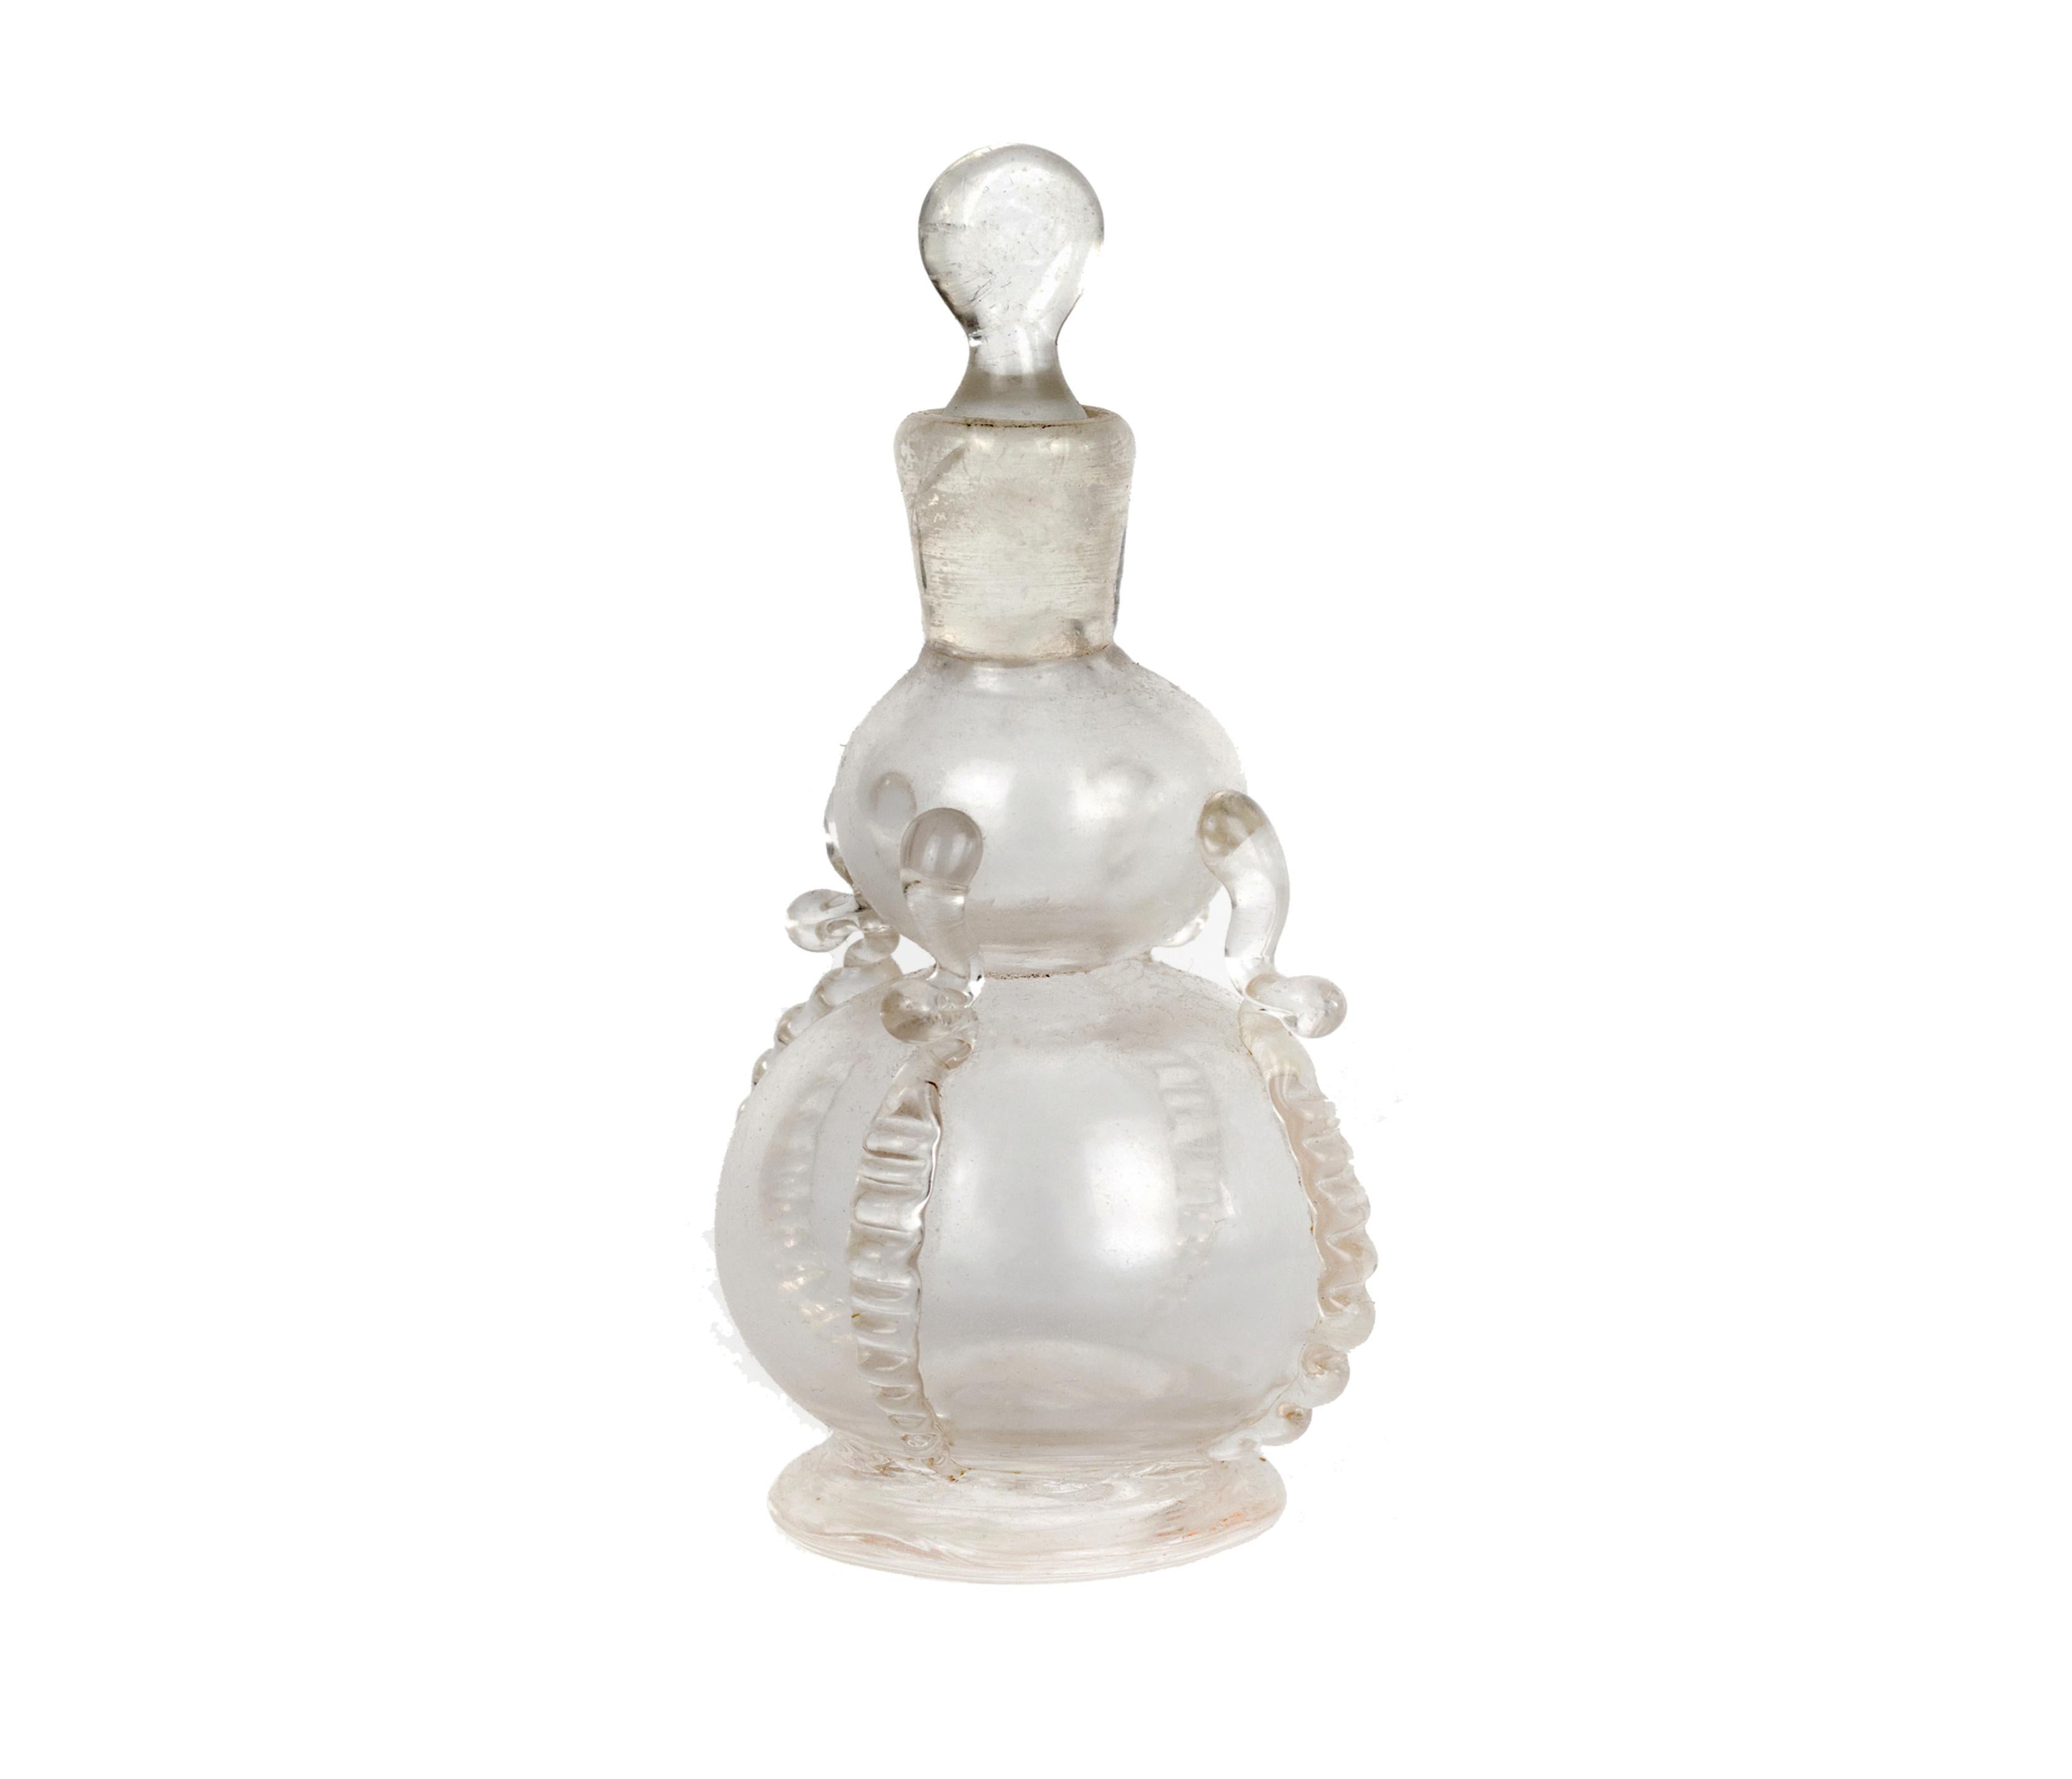 An early colorless smelling bottle or scent adorned with ribbons, rigaree and pontil mark, early 20th century